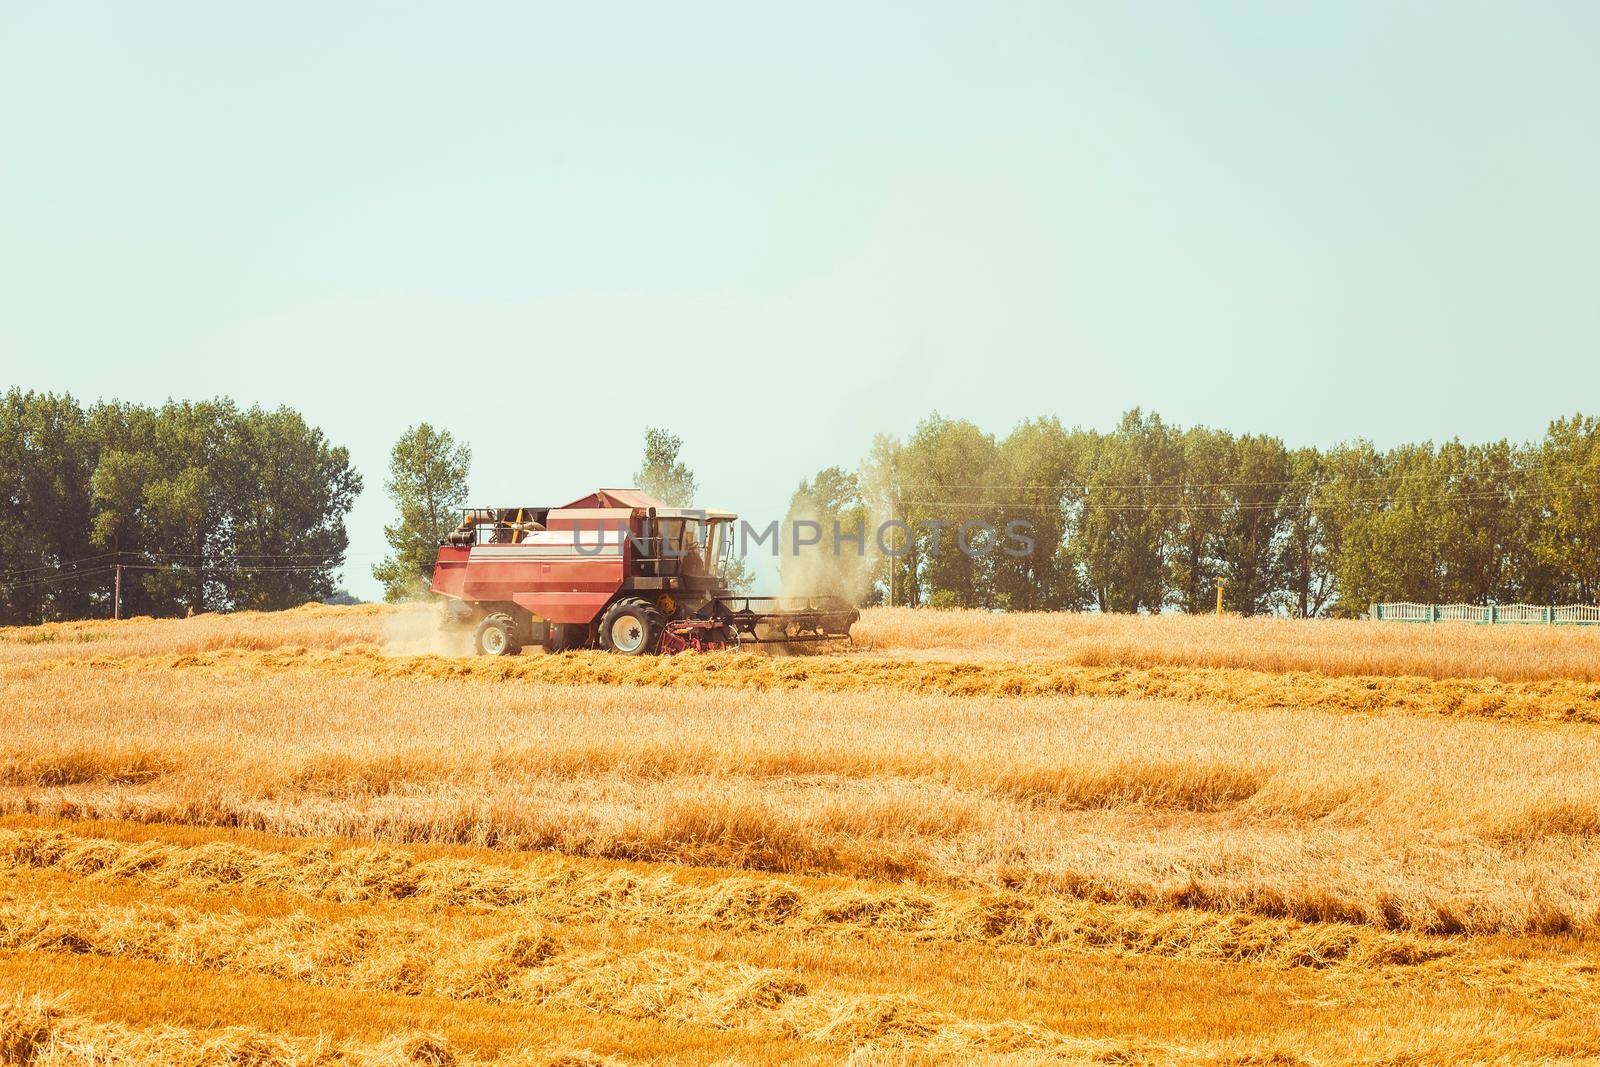 combine harvester by BY-_-BY